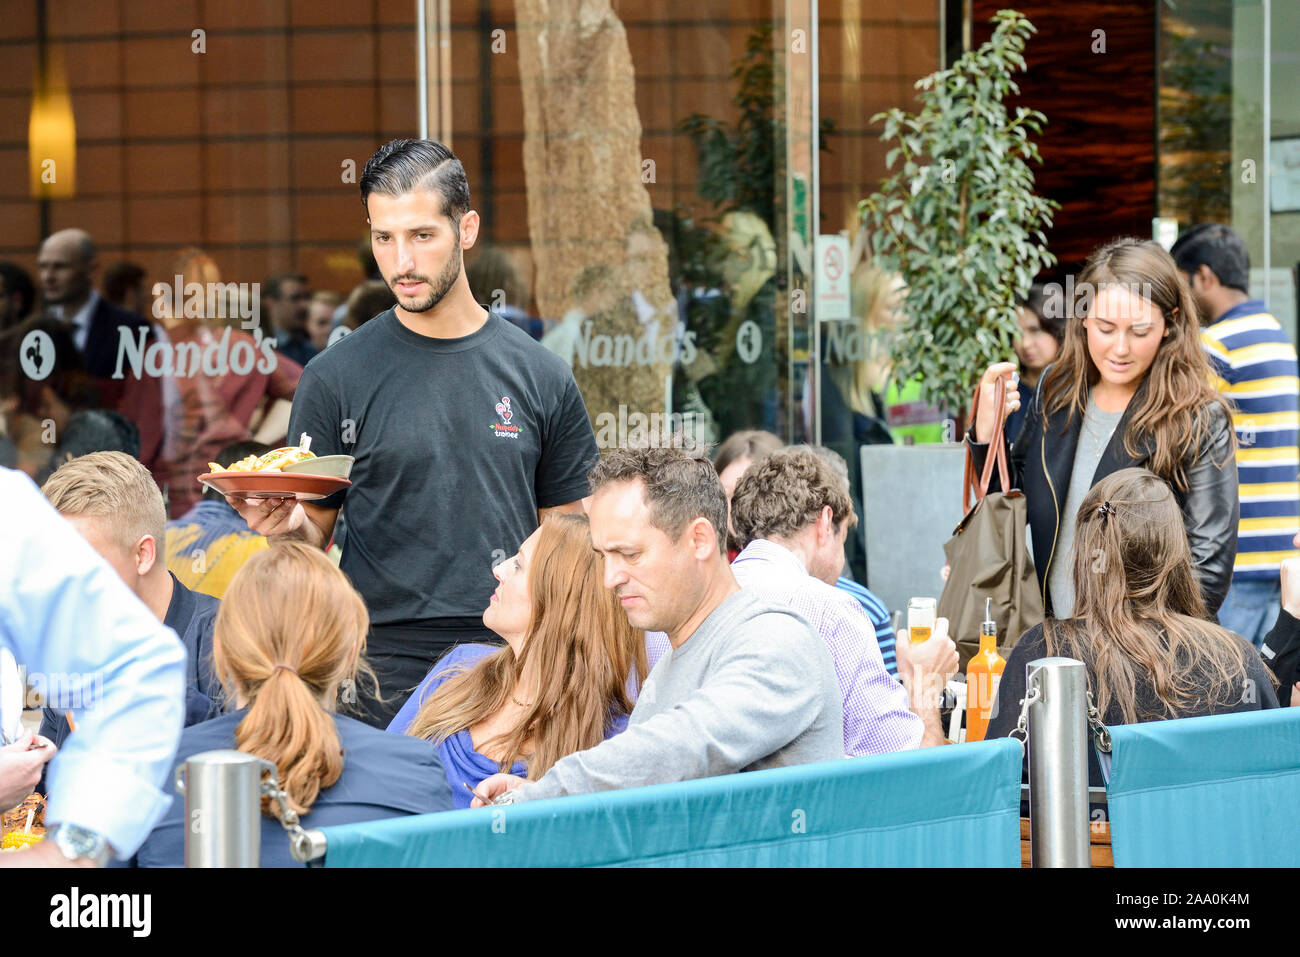 A waiter delivers food to a busy Nando's restaurant terrace in The City of Westminster, London Stock Photo